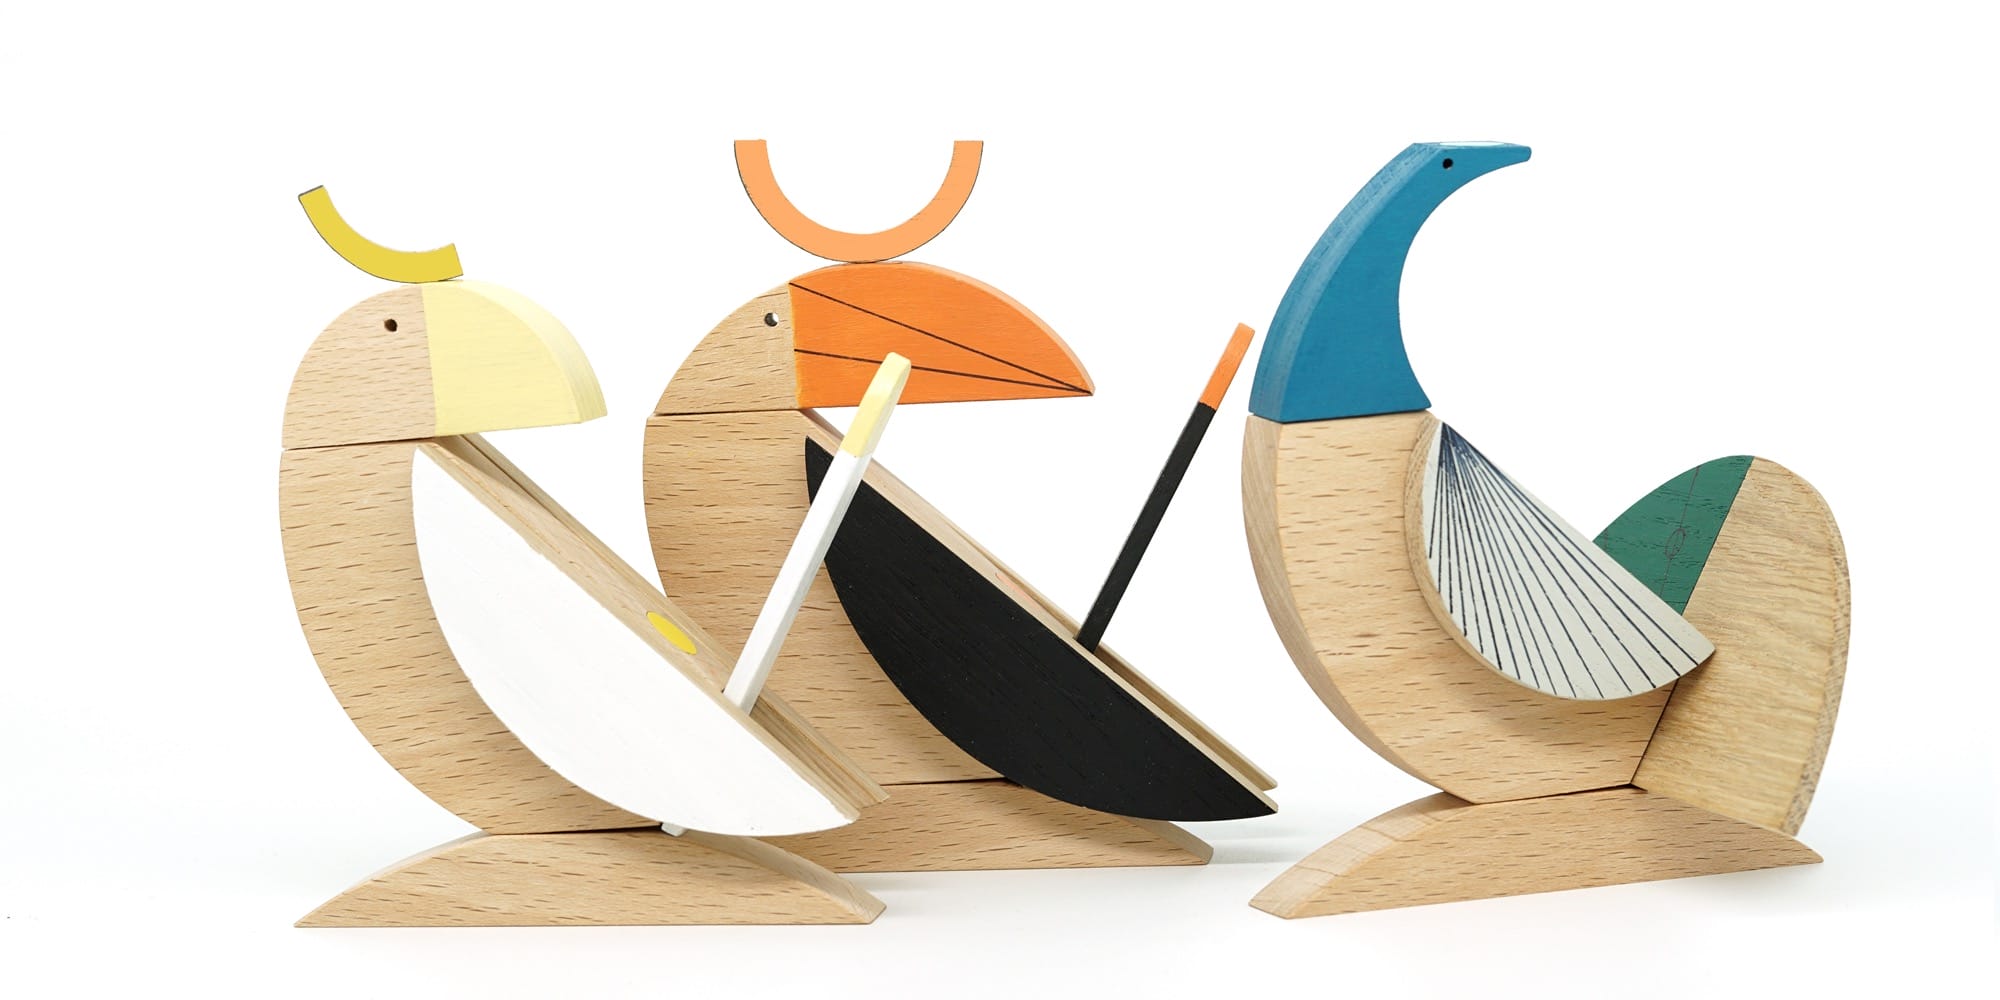 a series of three geometric wooden toys shaped like tropical birds